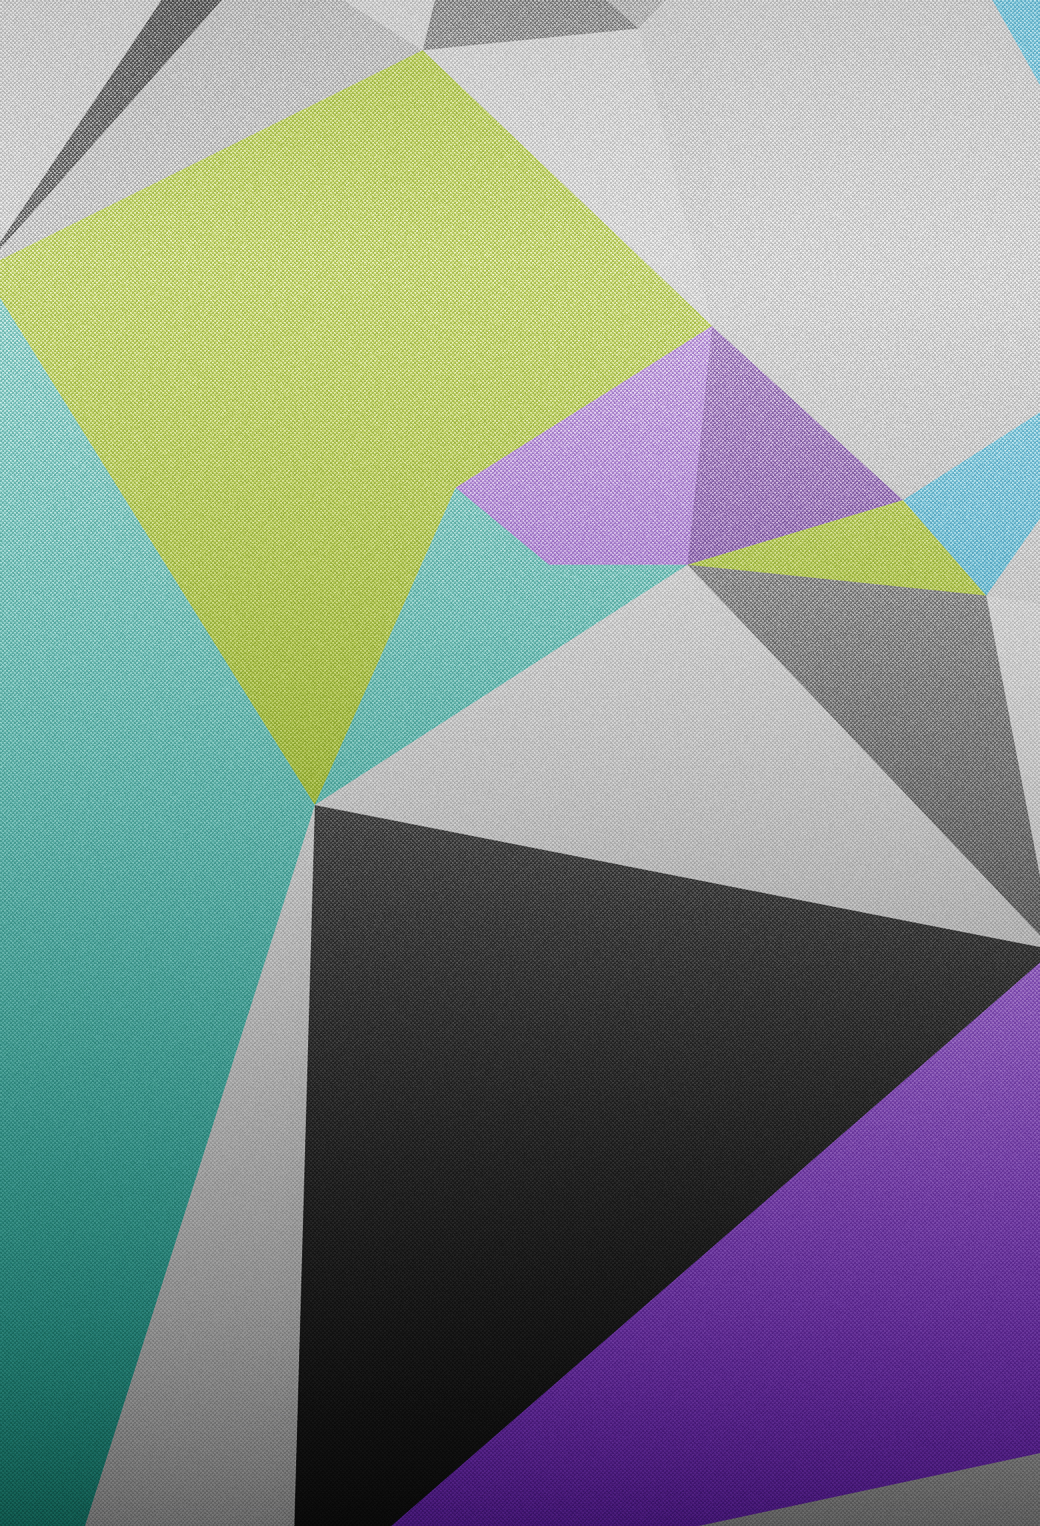 21 MORE Impressive iOS 7 Parallax Wallpapers to Download